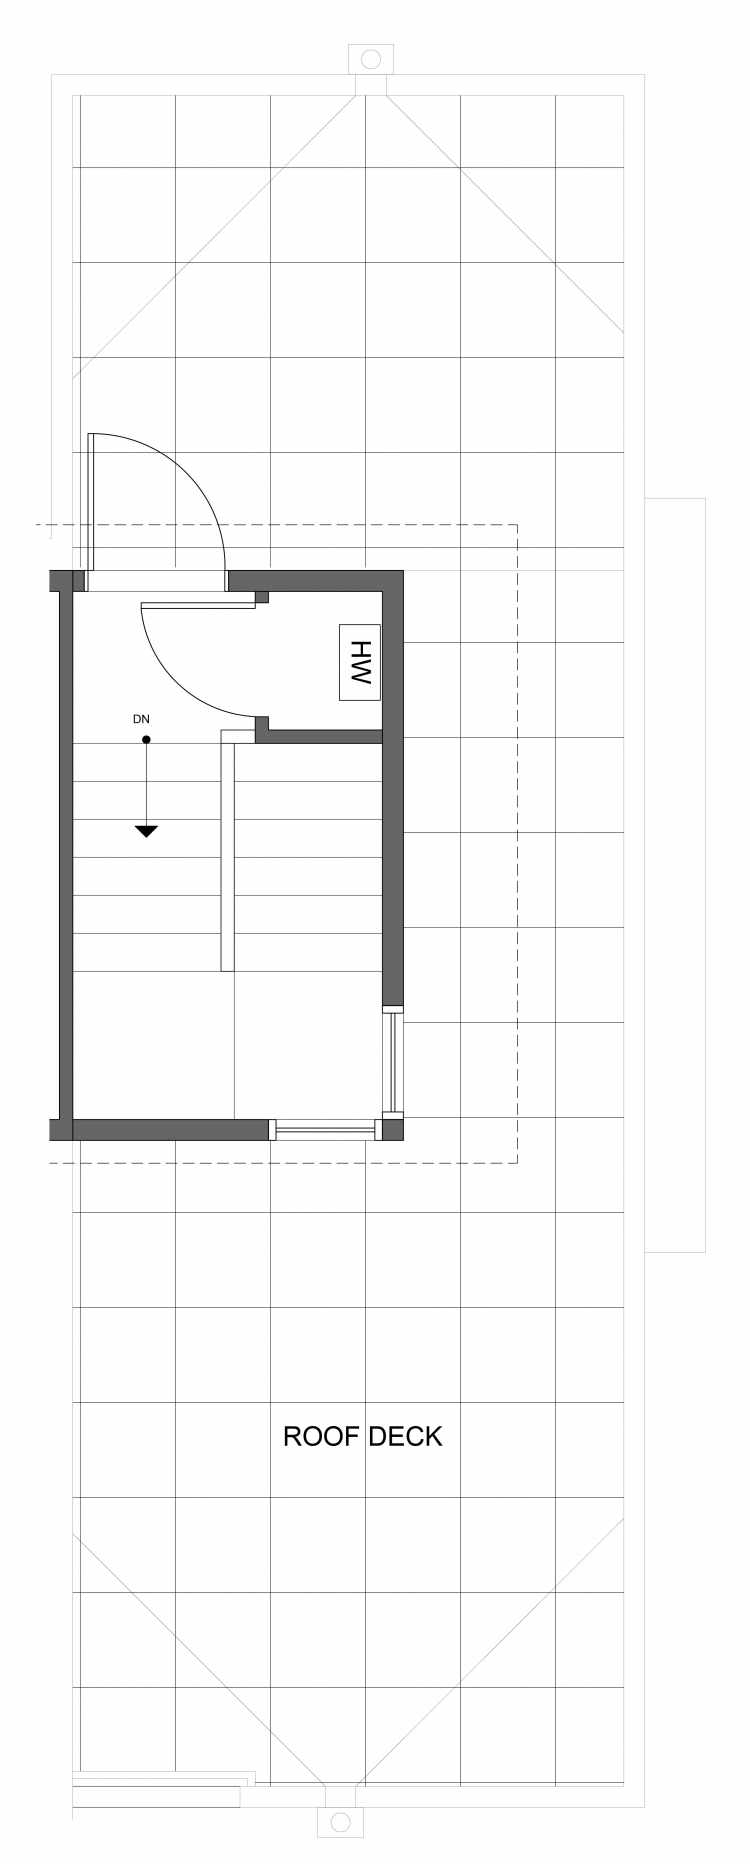 Roof Deck Floor Plan of 1030C NE 70th St, One of the Sopris on 70th Townhomes in Roosevelt